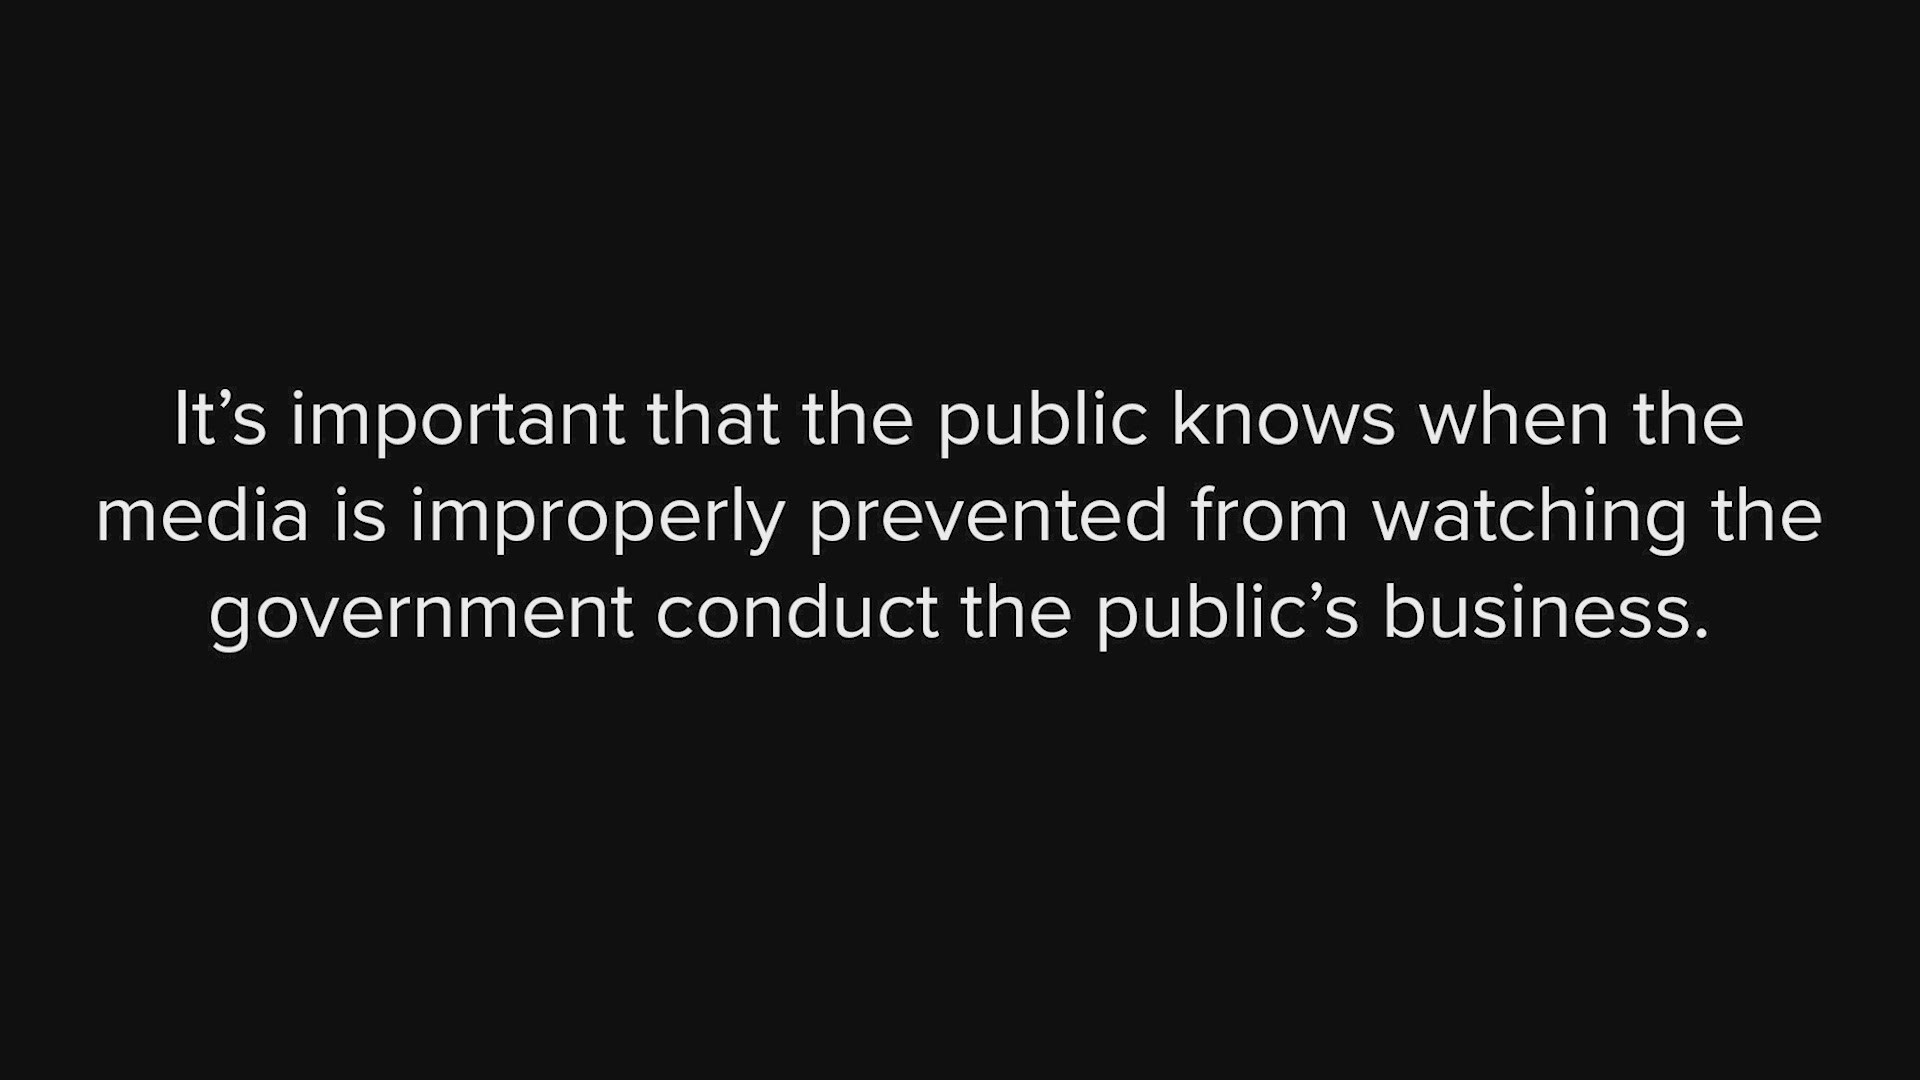 It’s important that the public knows when the media is improperly prevented from watching the government conduct the public’s business.